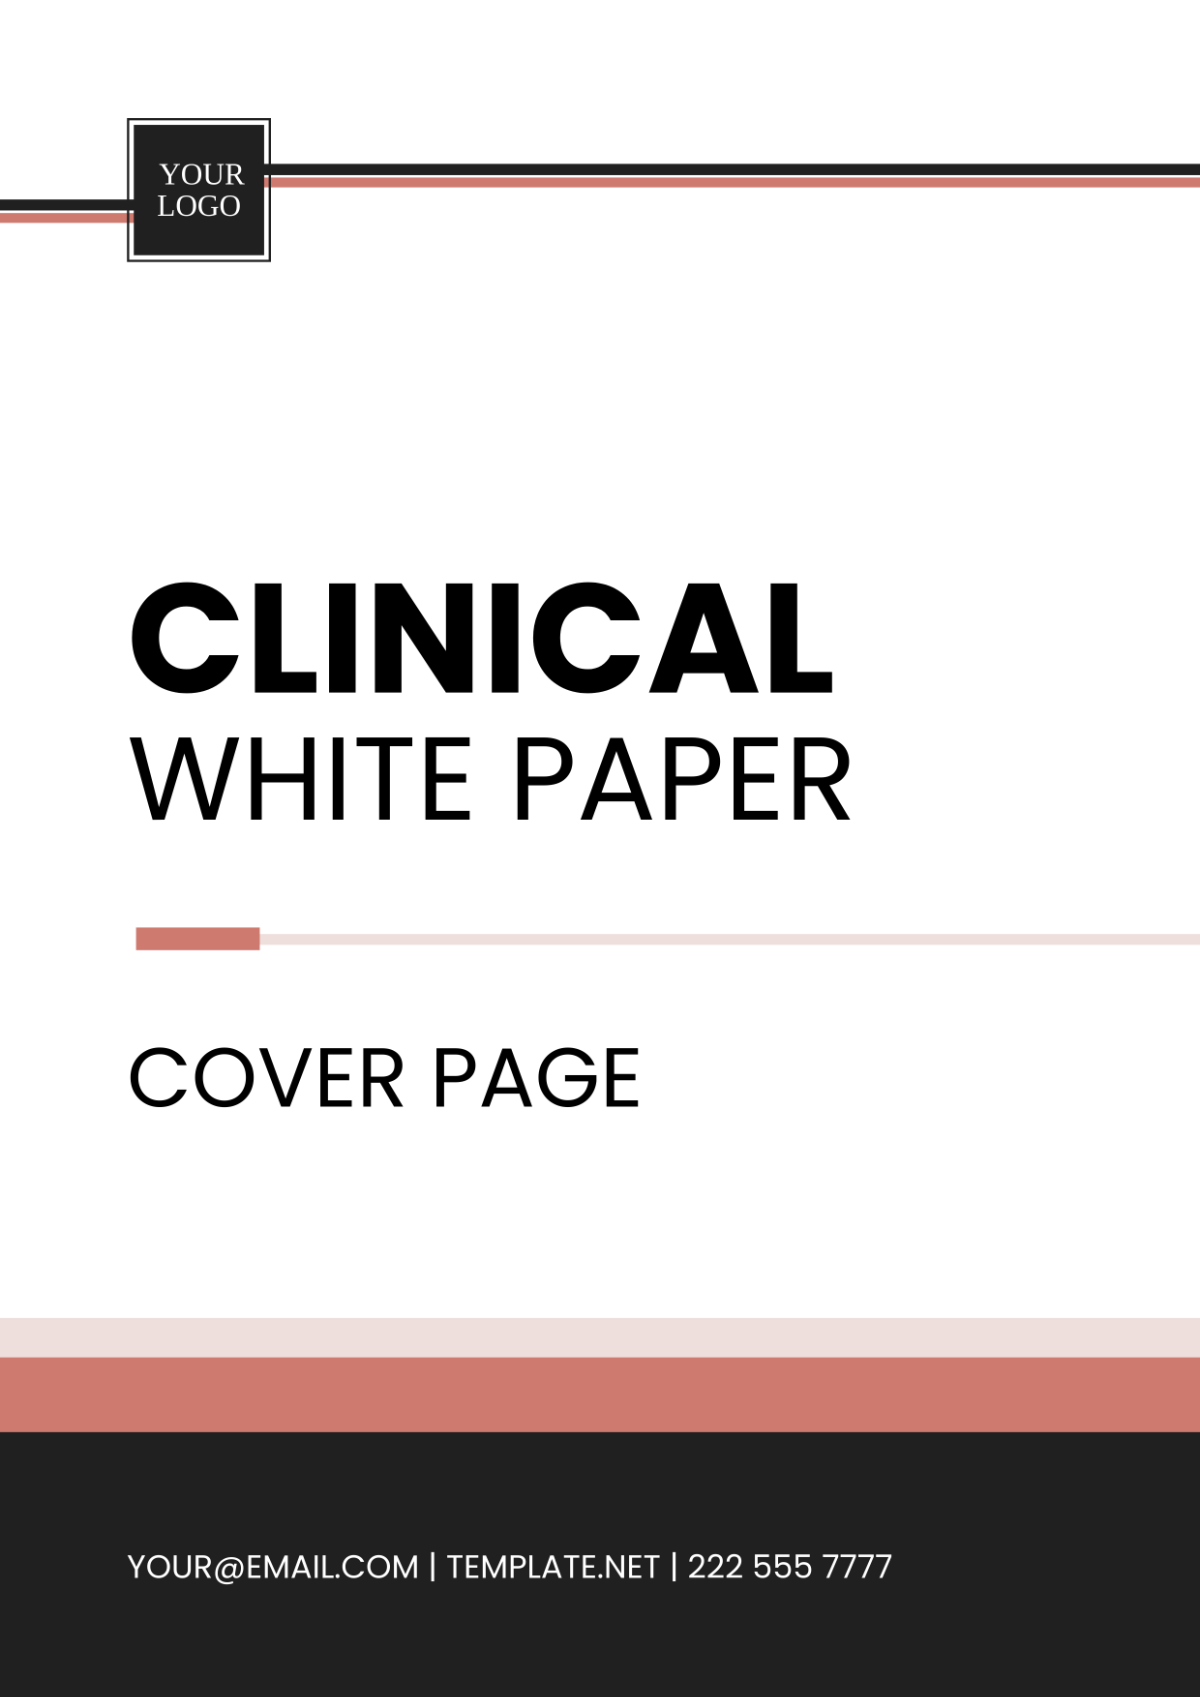 Clinical White Paper Cover Page